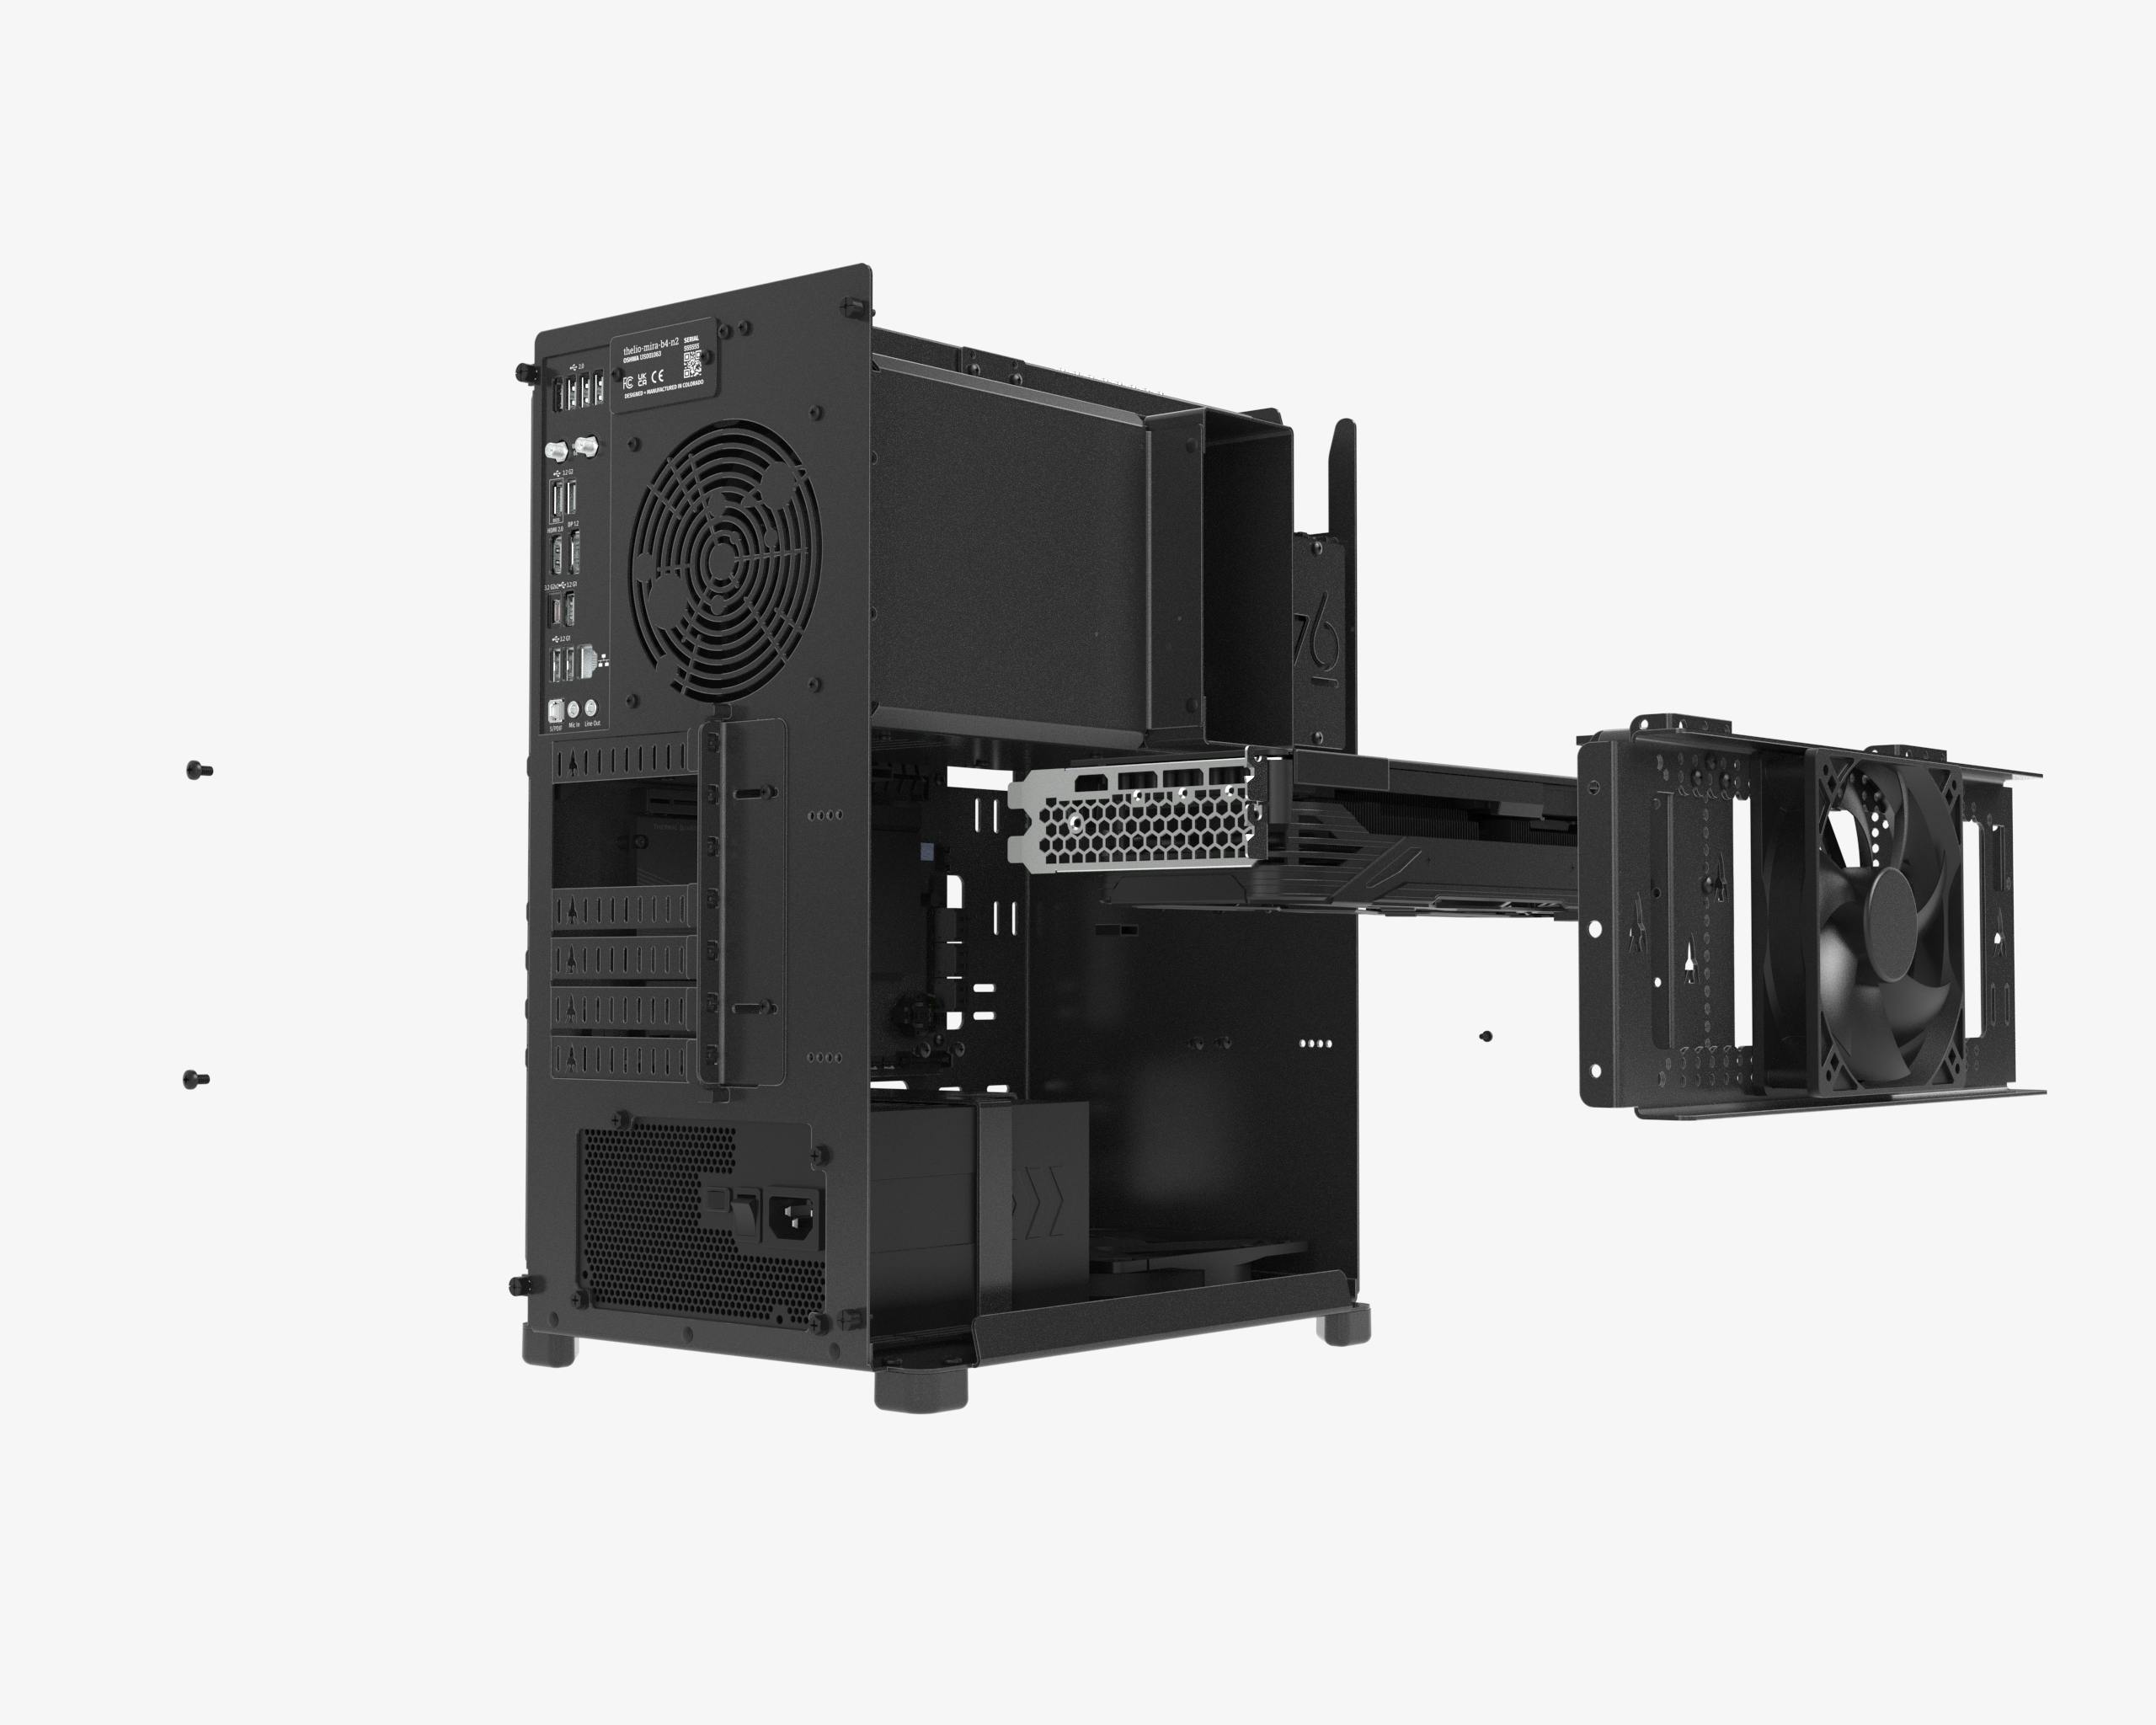 Internal shot of Thelio Mira, revealing the optional fan and internal components coming out of the machine which showcase the ability to upgrade the machine.